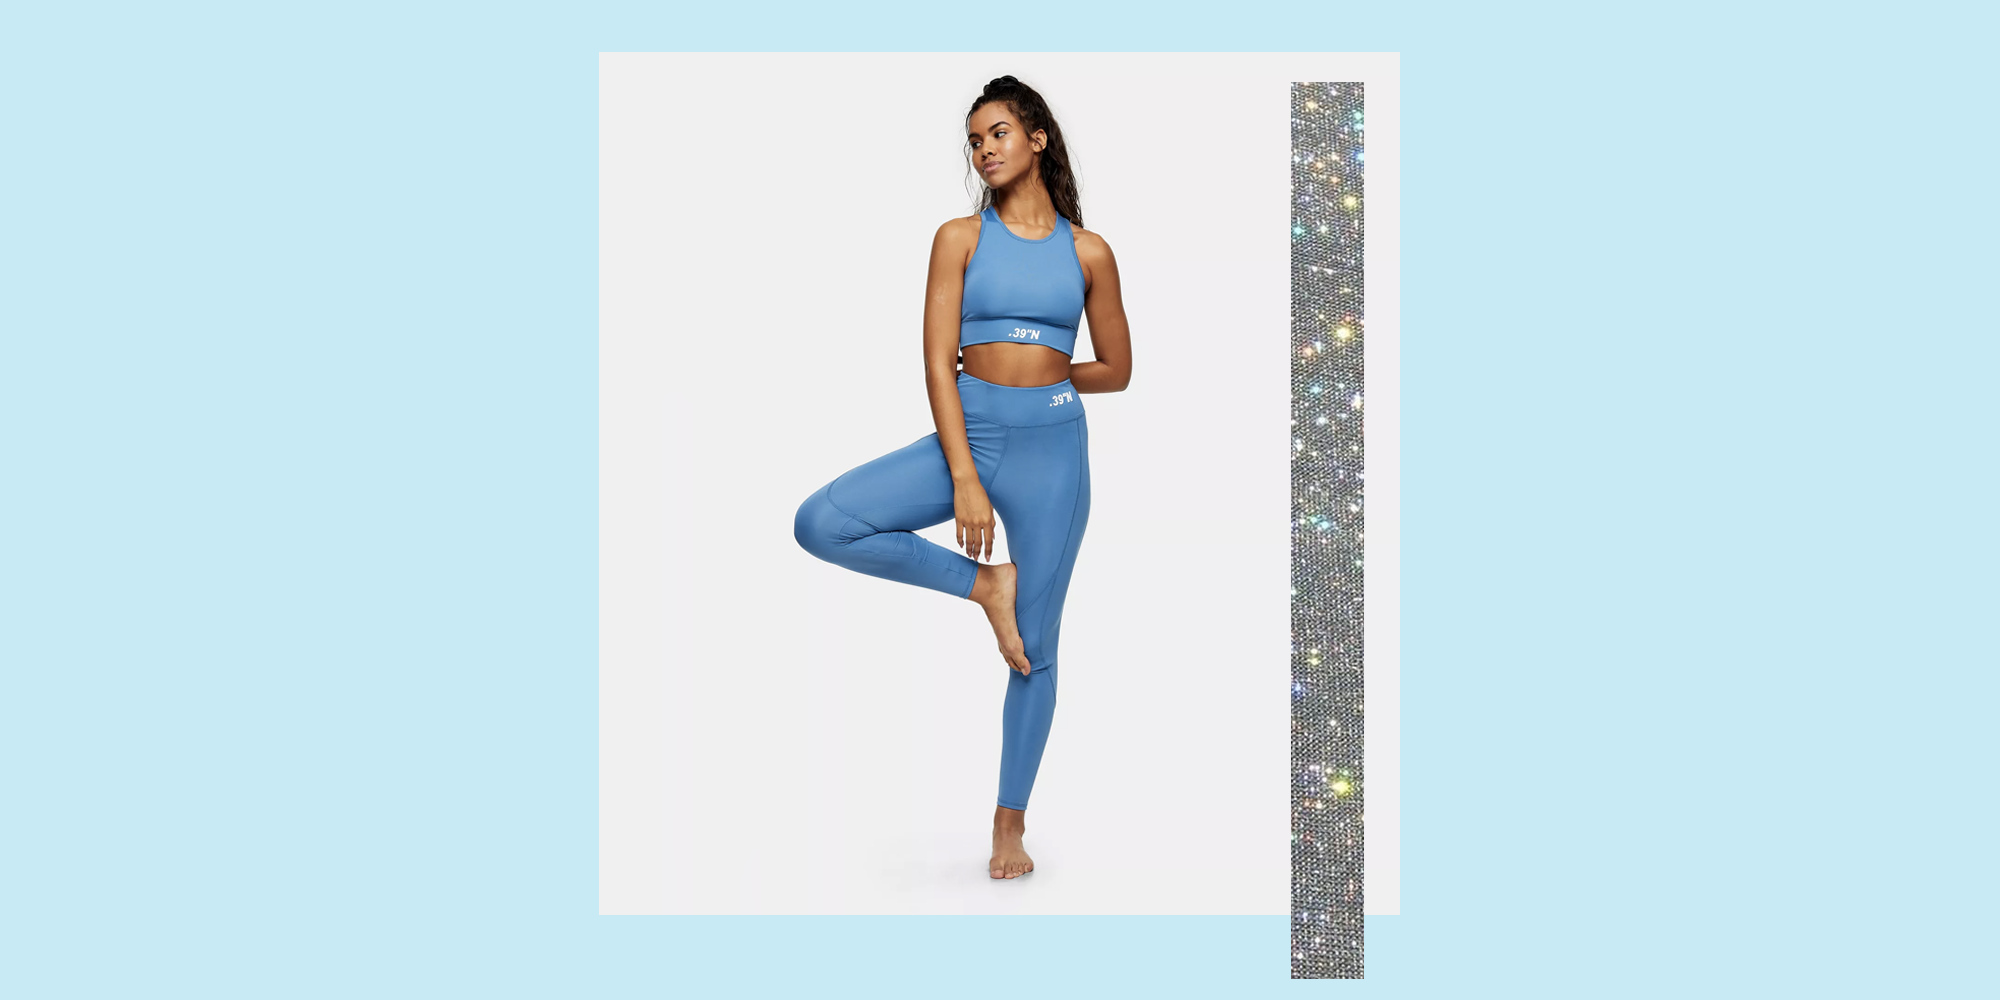 ASOS Seamless leggings With Branded Waistband in Blue